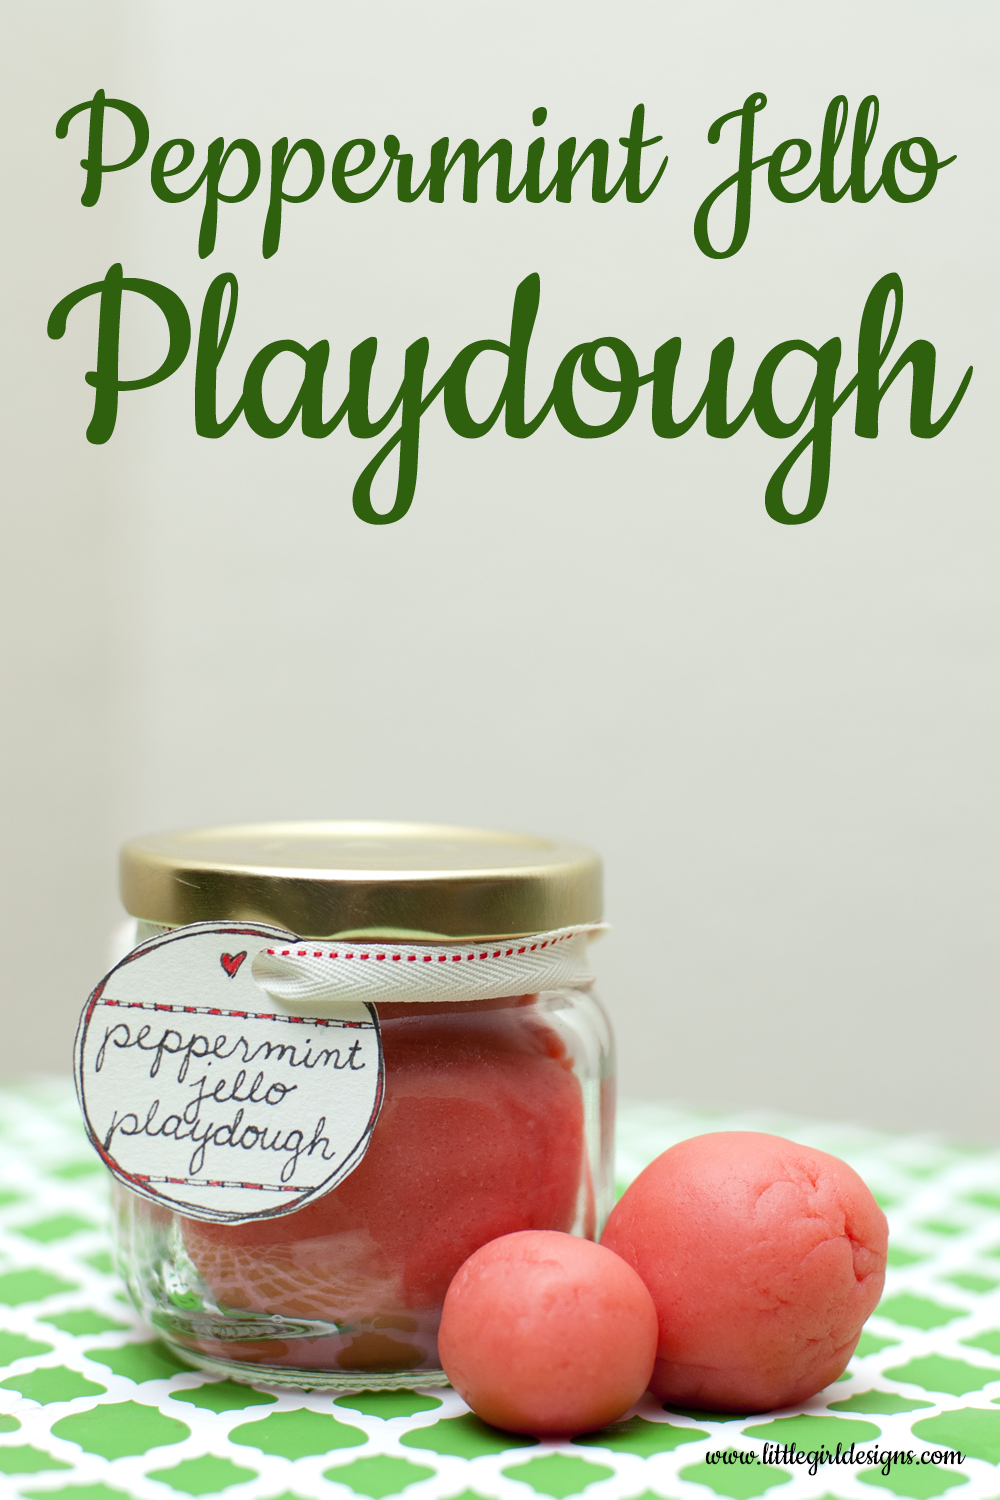 Peppermint Jello Playdough - This is my new favorite playdough recipe. You'll want to mix up a batch this afternoon! @ littlegirldesigns.com